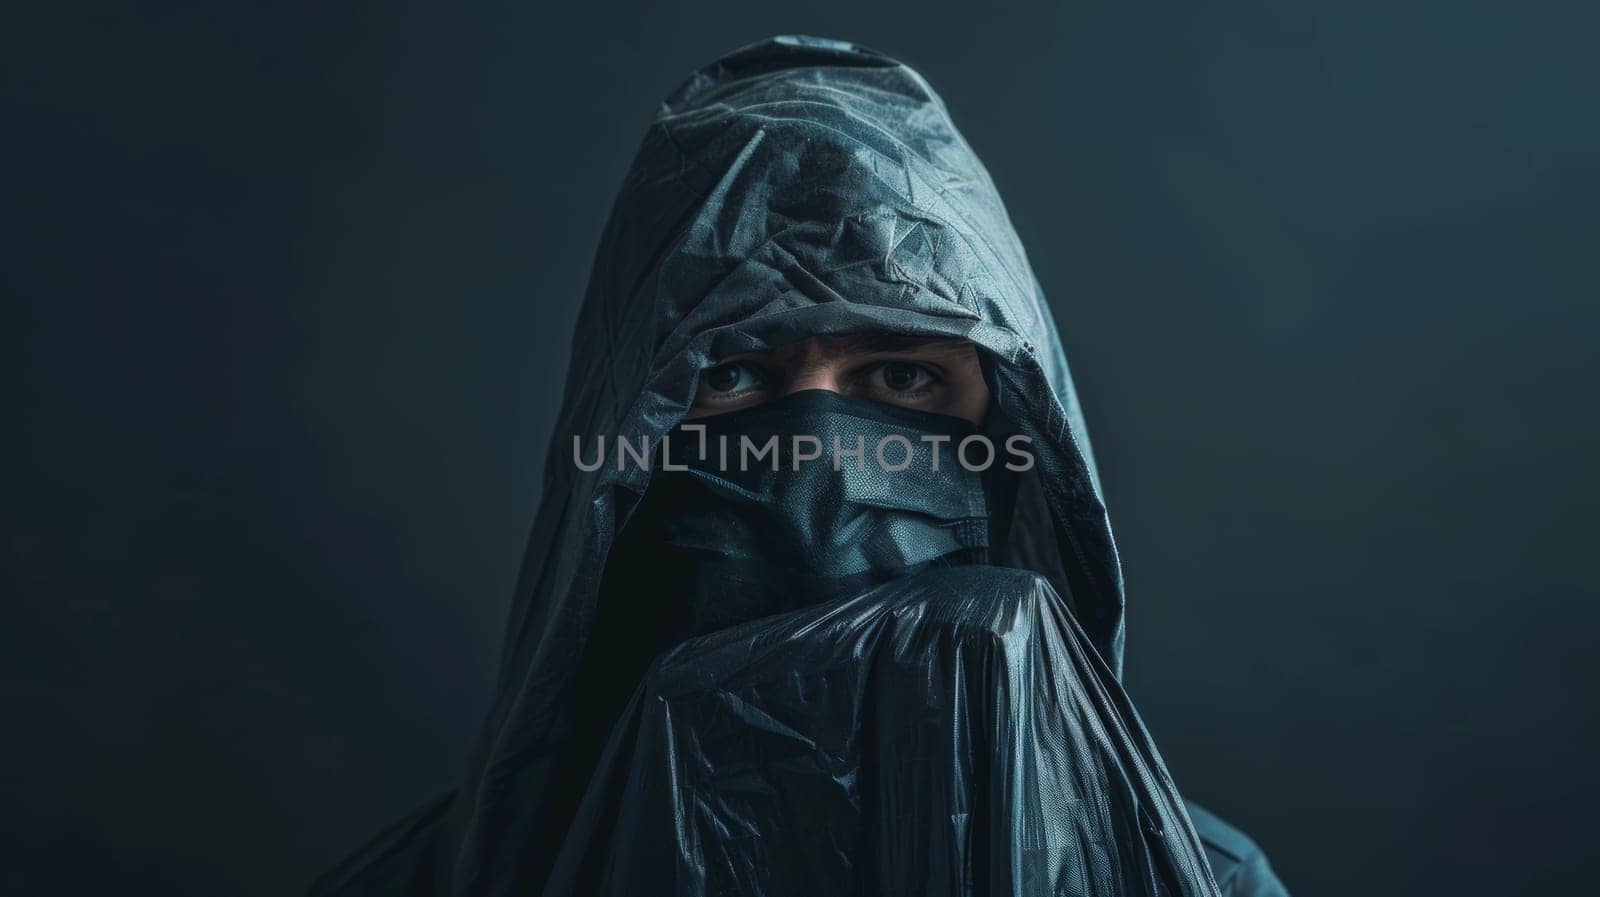 A person wearing a hoodie and plastic bag over their head